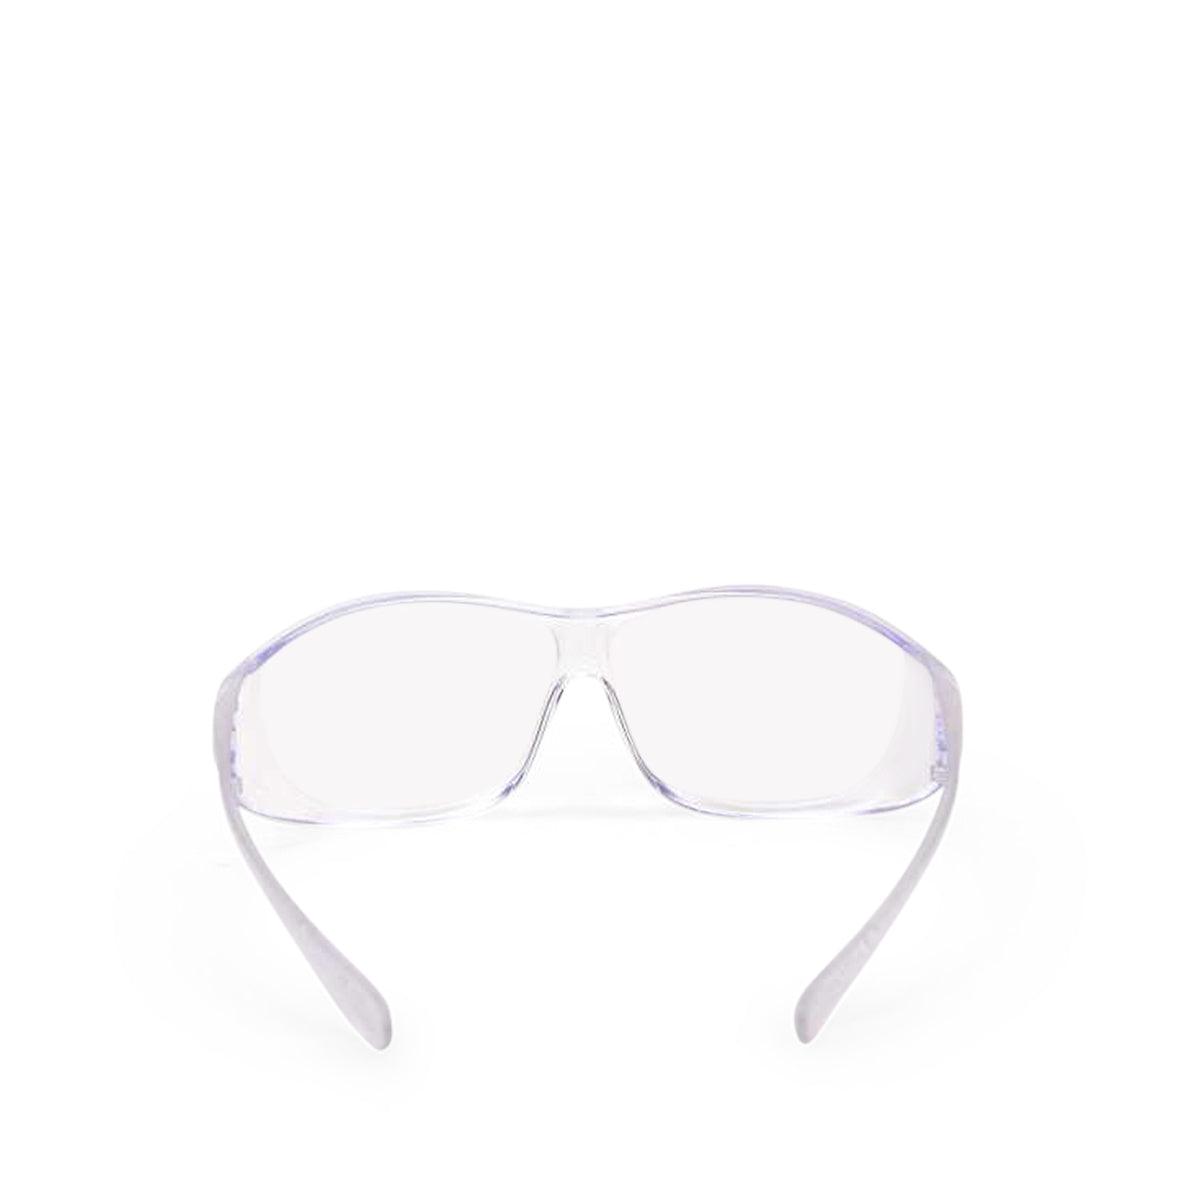 Buy Lightguard Large Fitover Safety Glasses at Safeloox